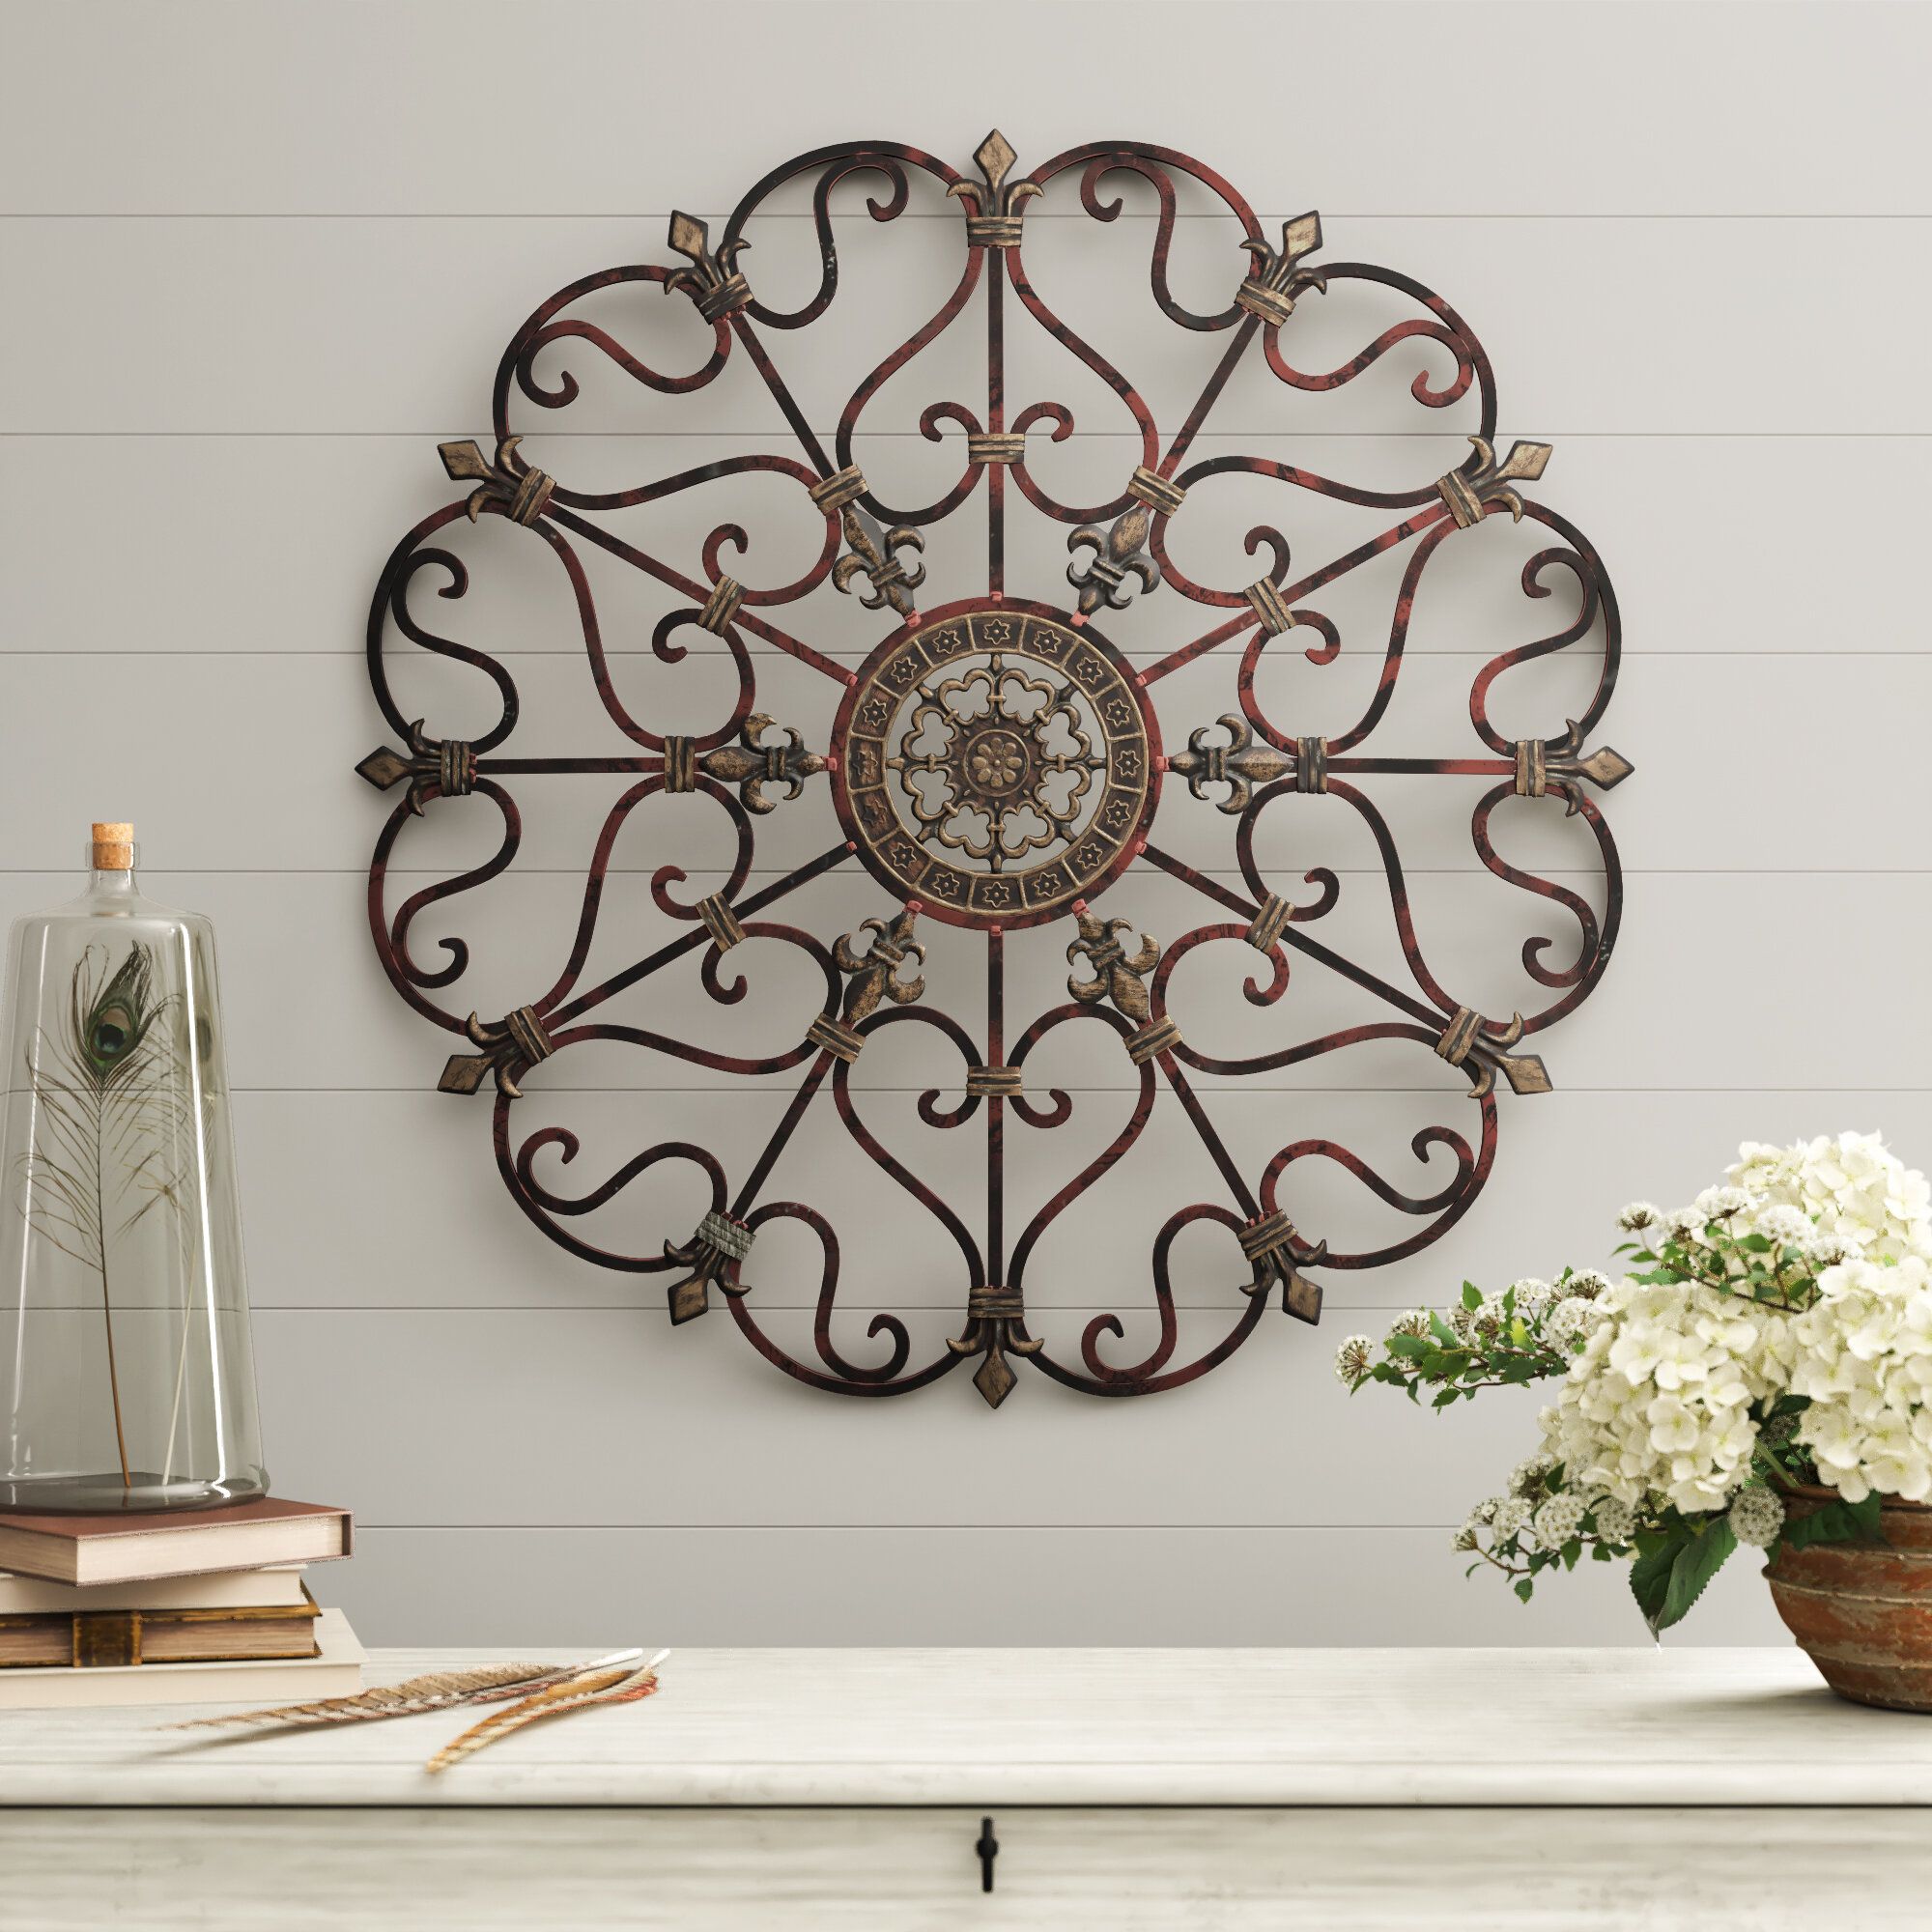 Farmhouse & Rustic Wall Decor | Birch Lane Pertaining To 2 Piece Multiple Layer Metal Flower Wall Decor Sets (View 10 of 30)